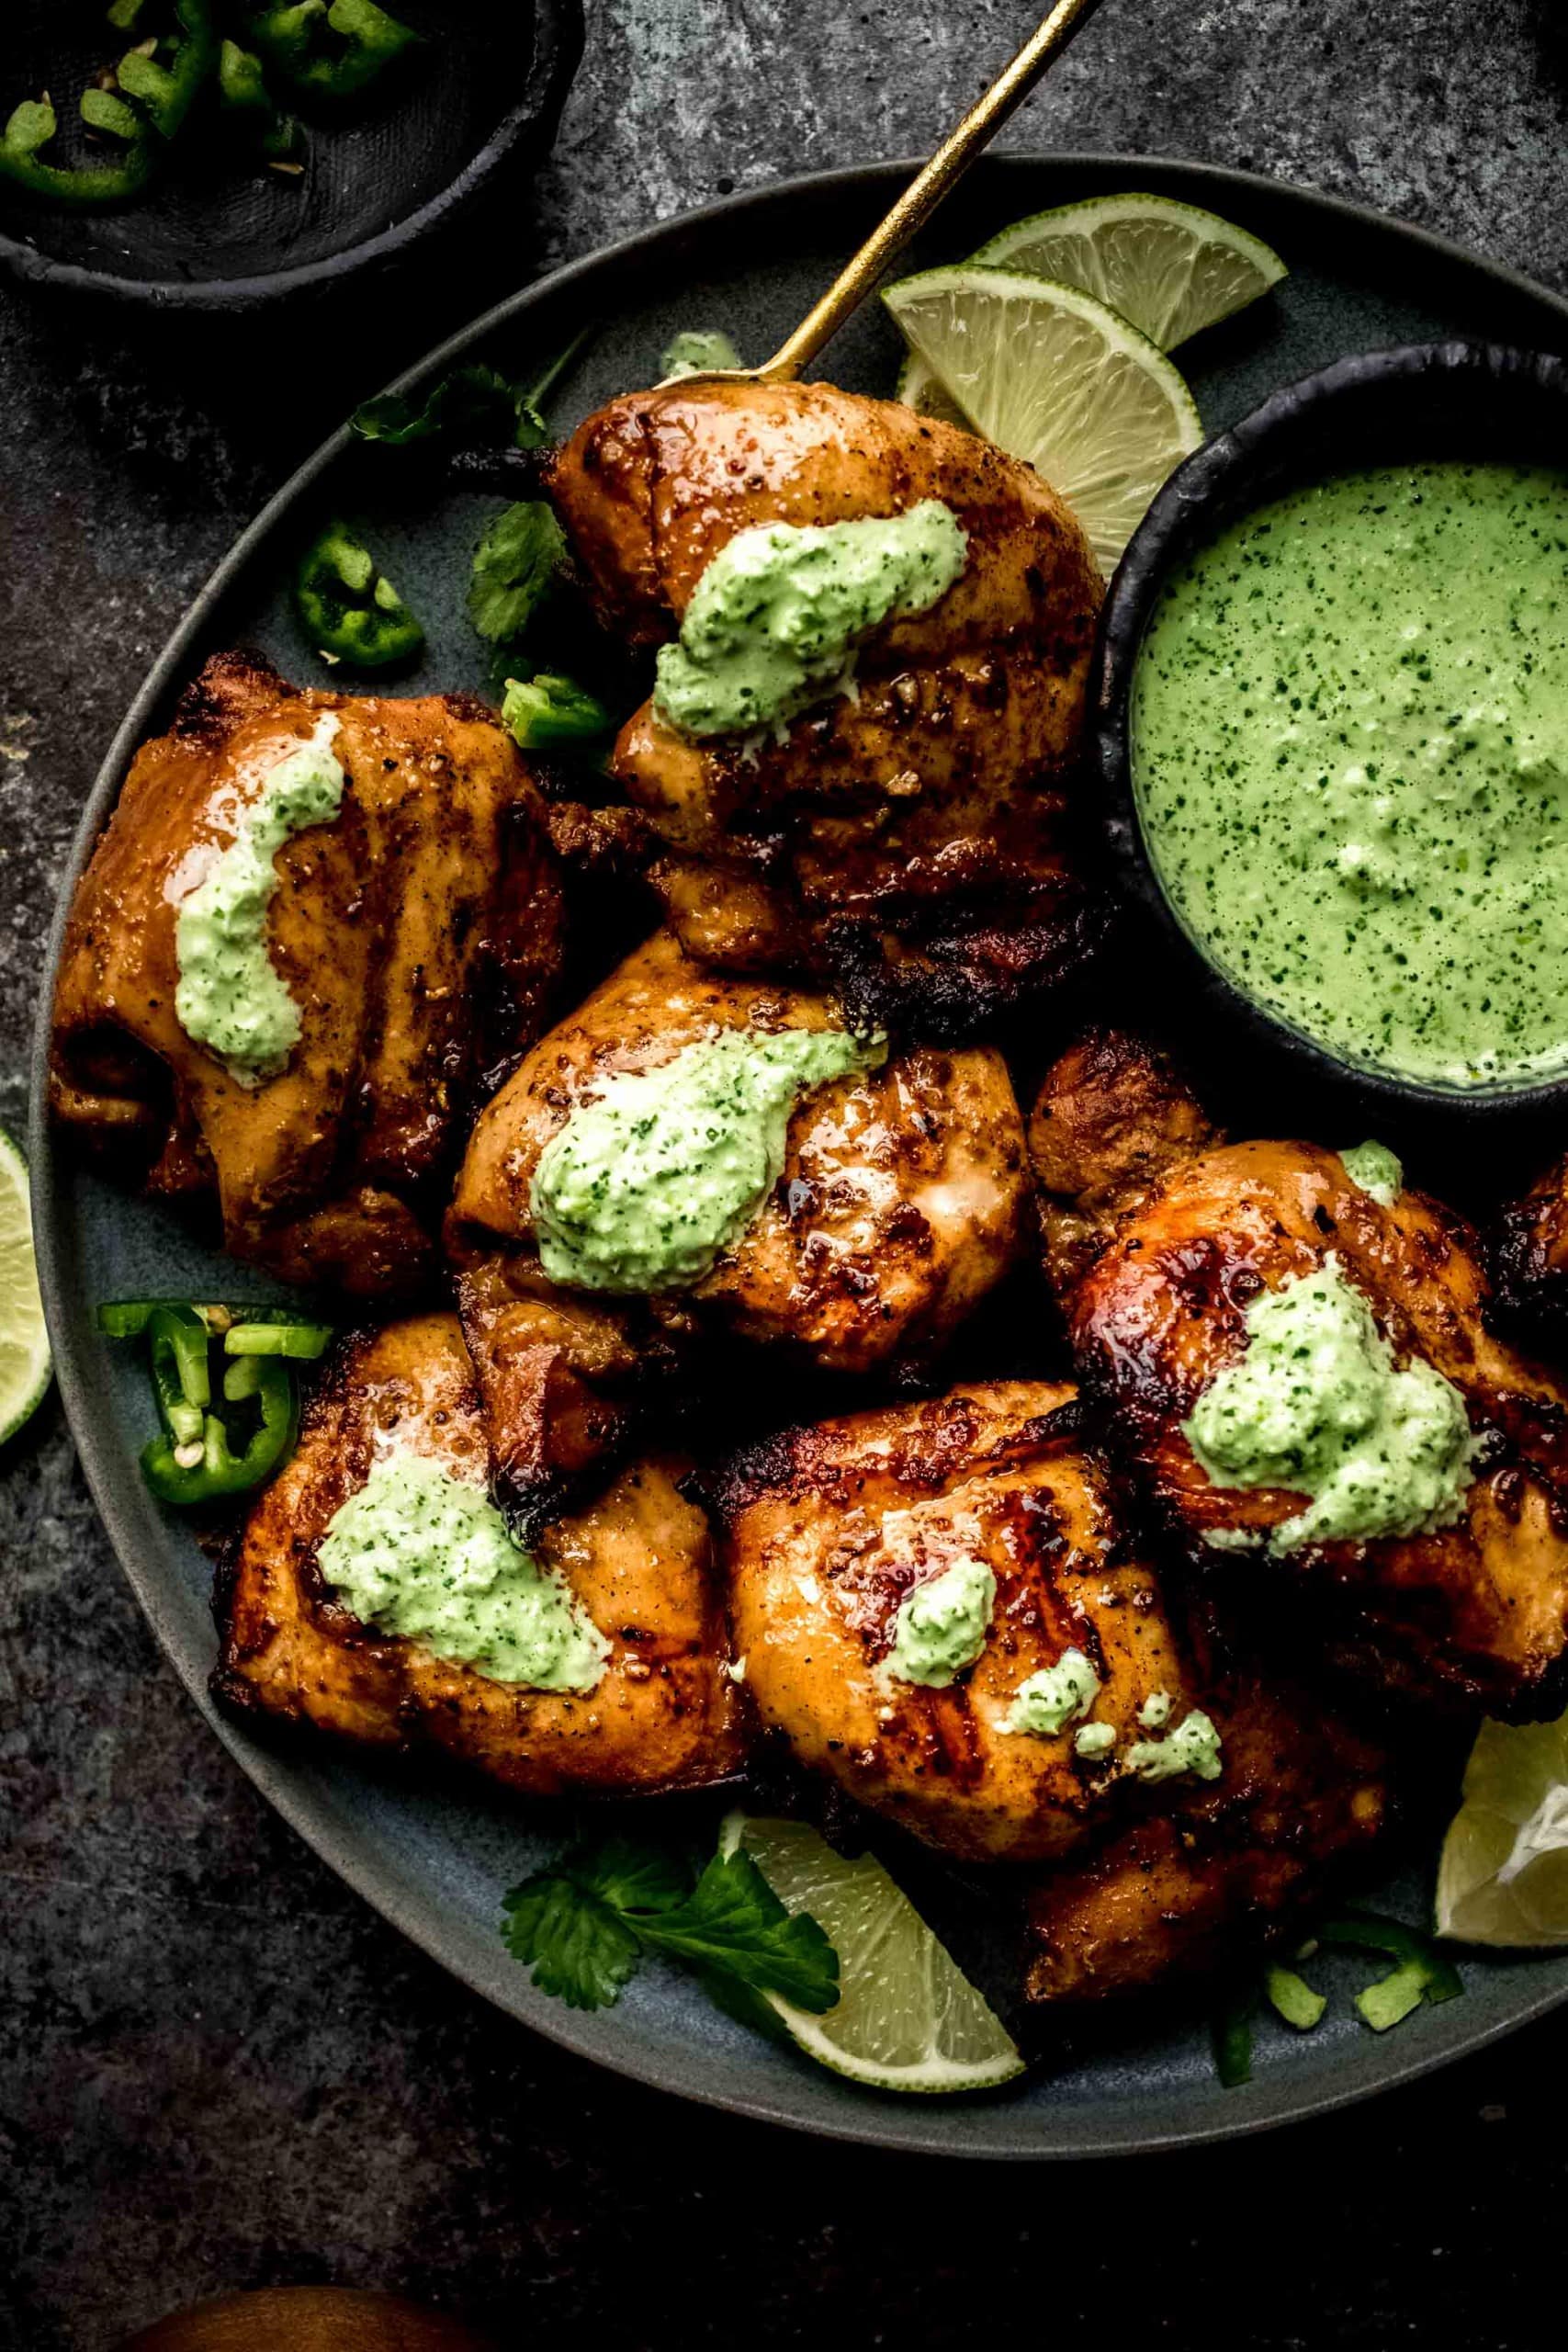 Plate of chicken drizzled with creamy green sauce.